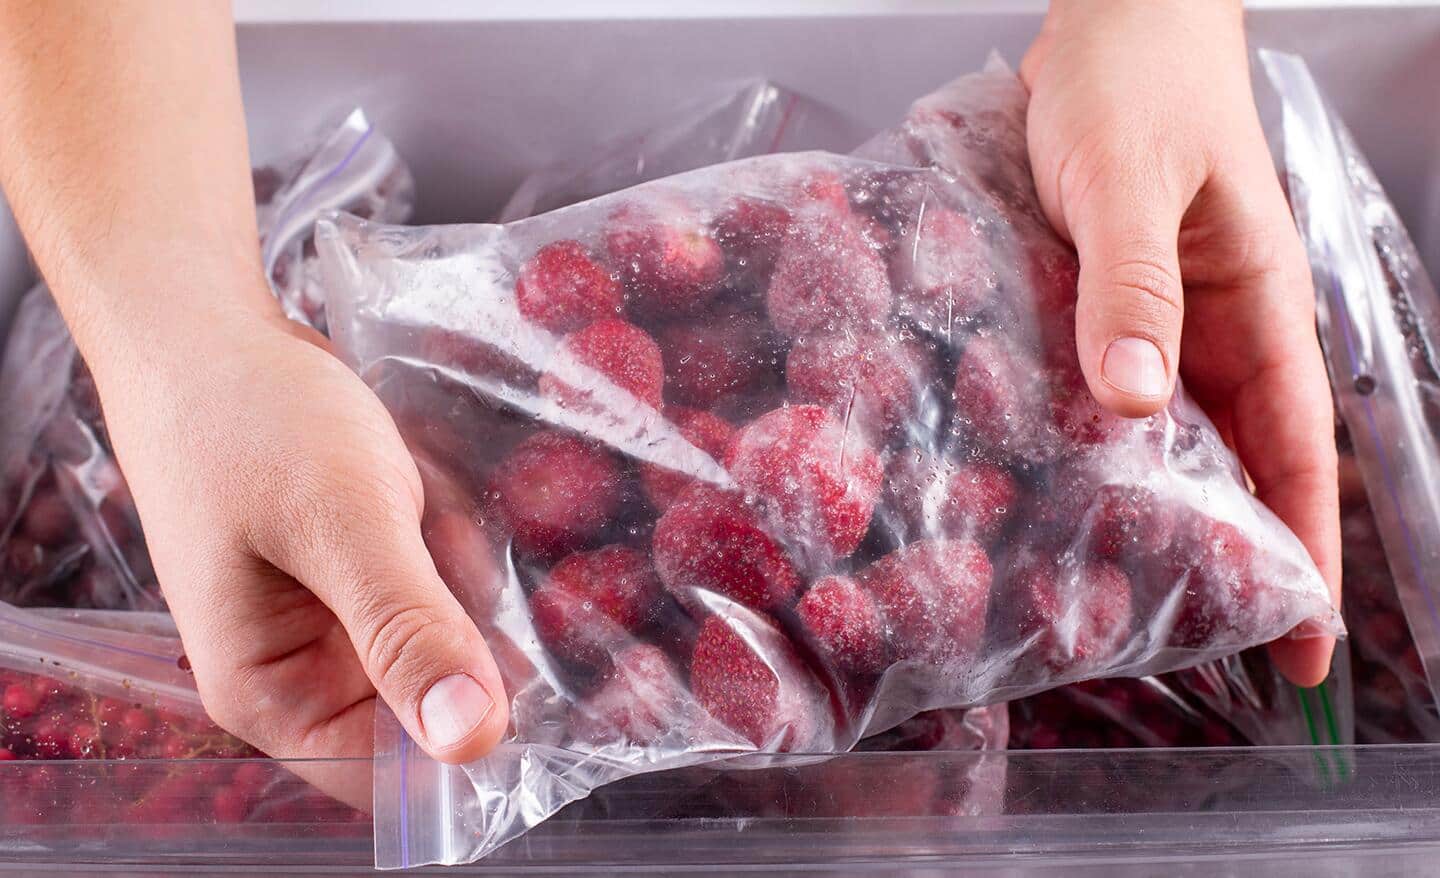 A person holds a bag of frozen berries